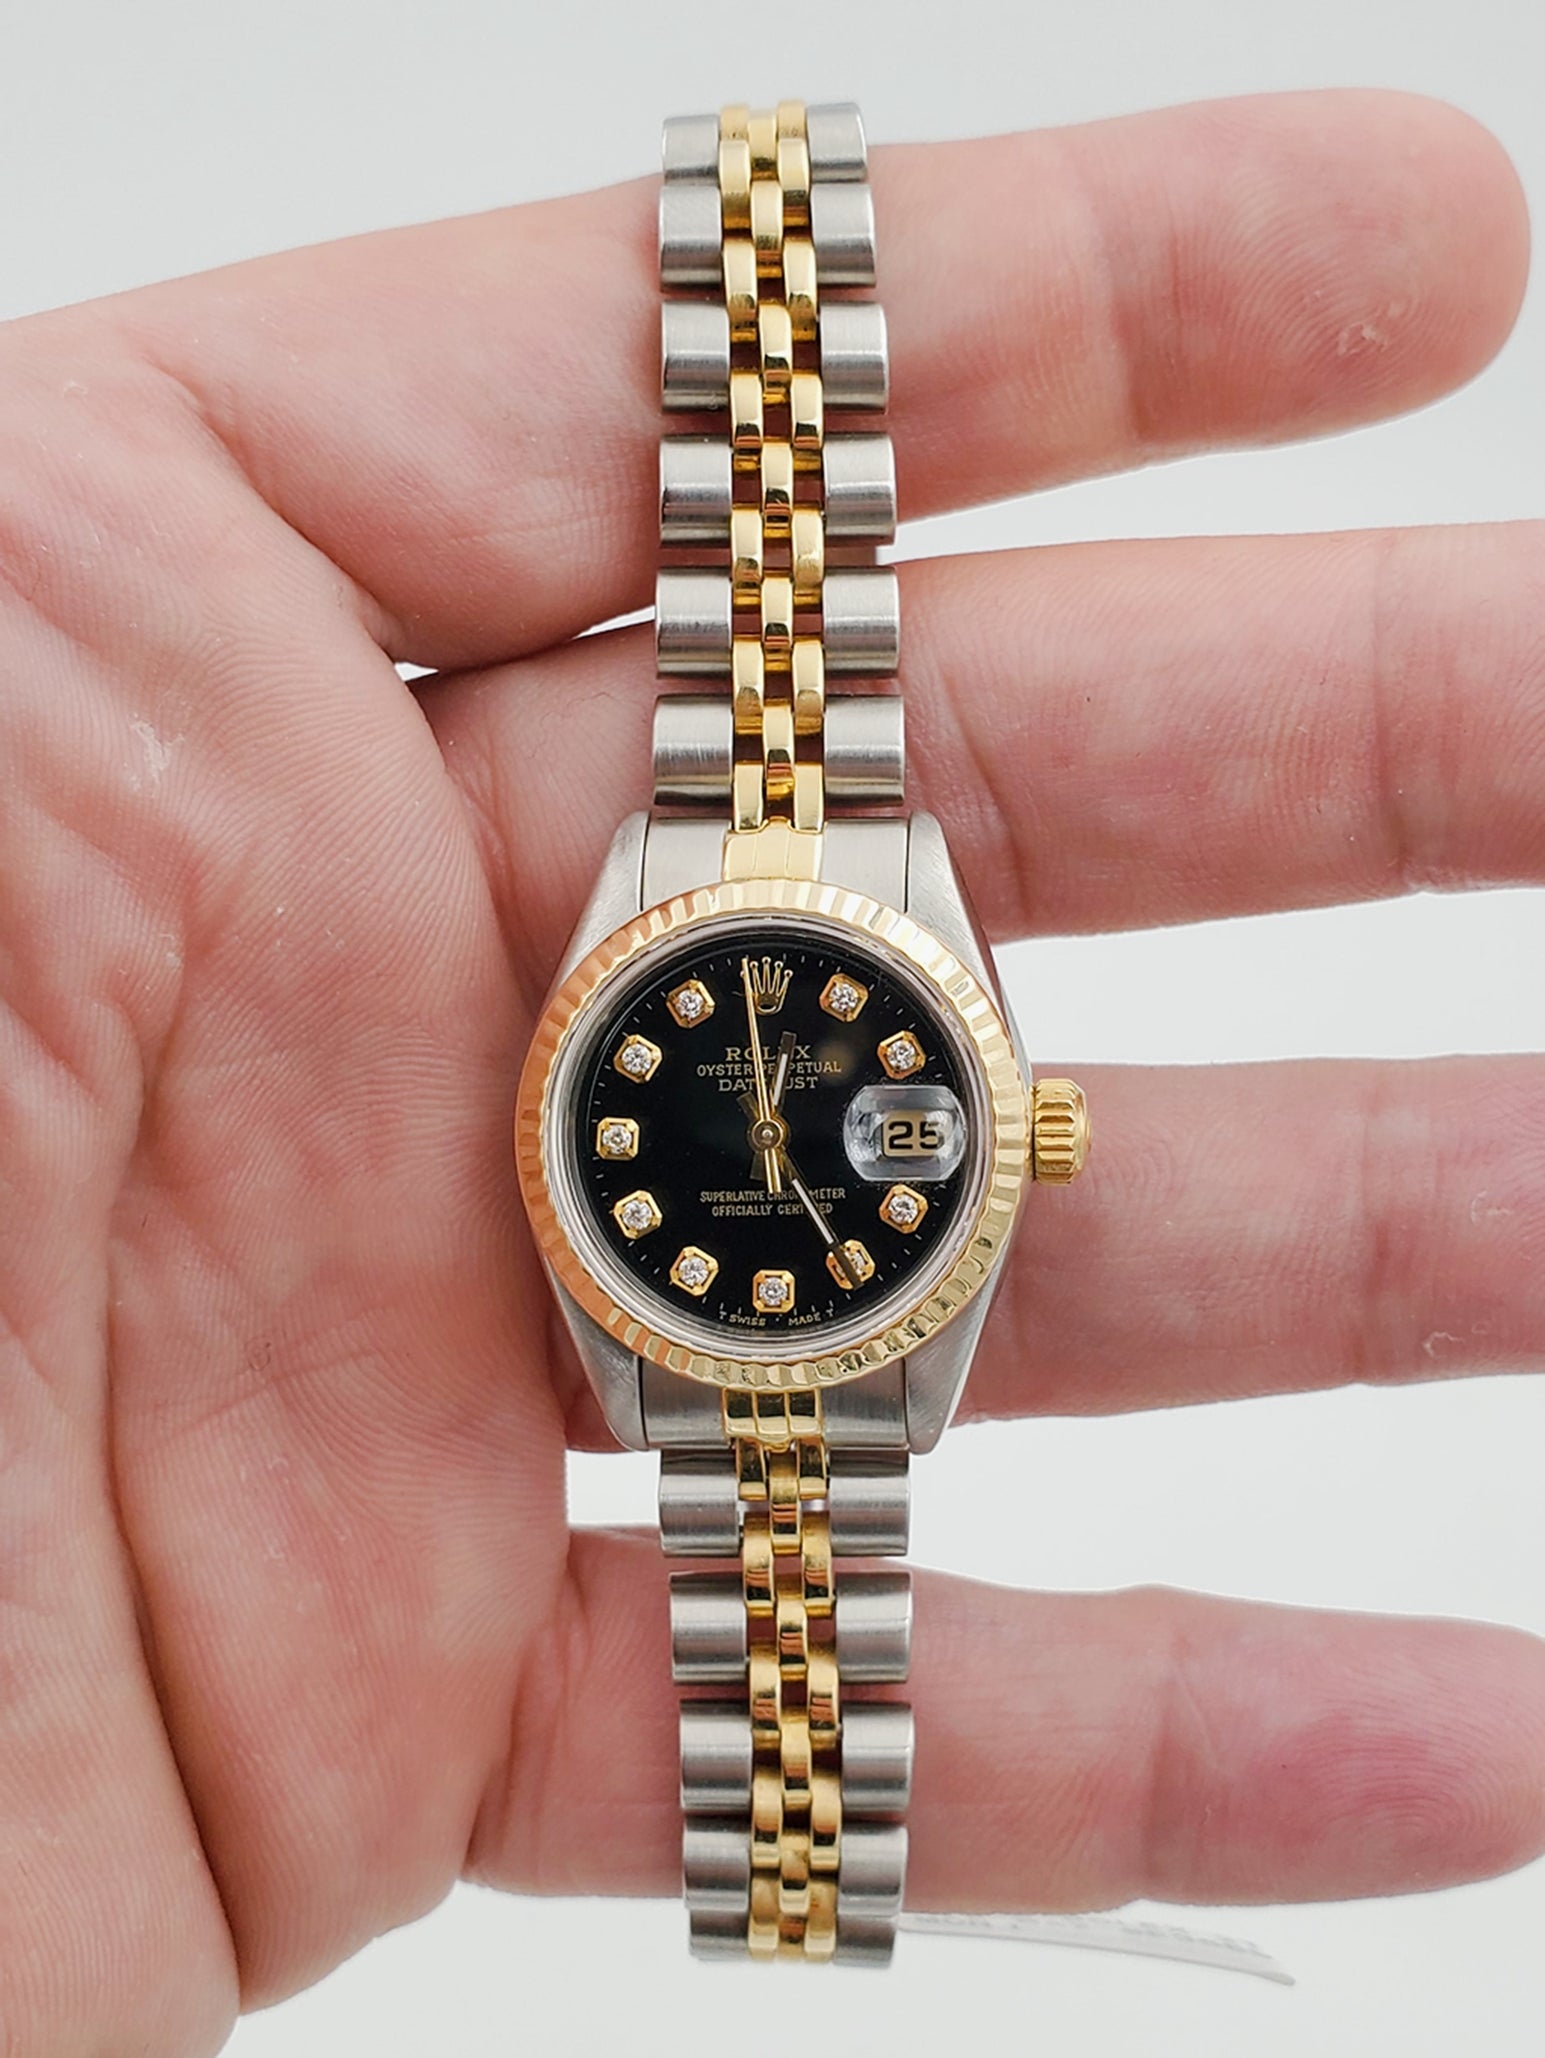 Ladies Rolex 26mm DateJust Two Tone 18K Gold / Stainless Steel Watch with Black Diamond Dial and Fluted Bezel. (Pre-Owned)